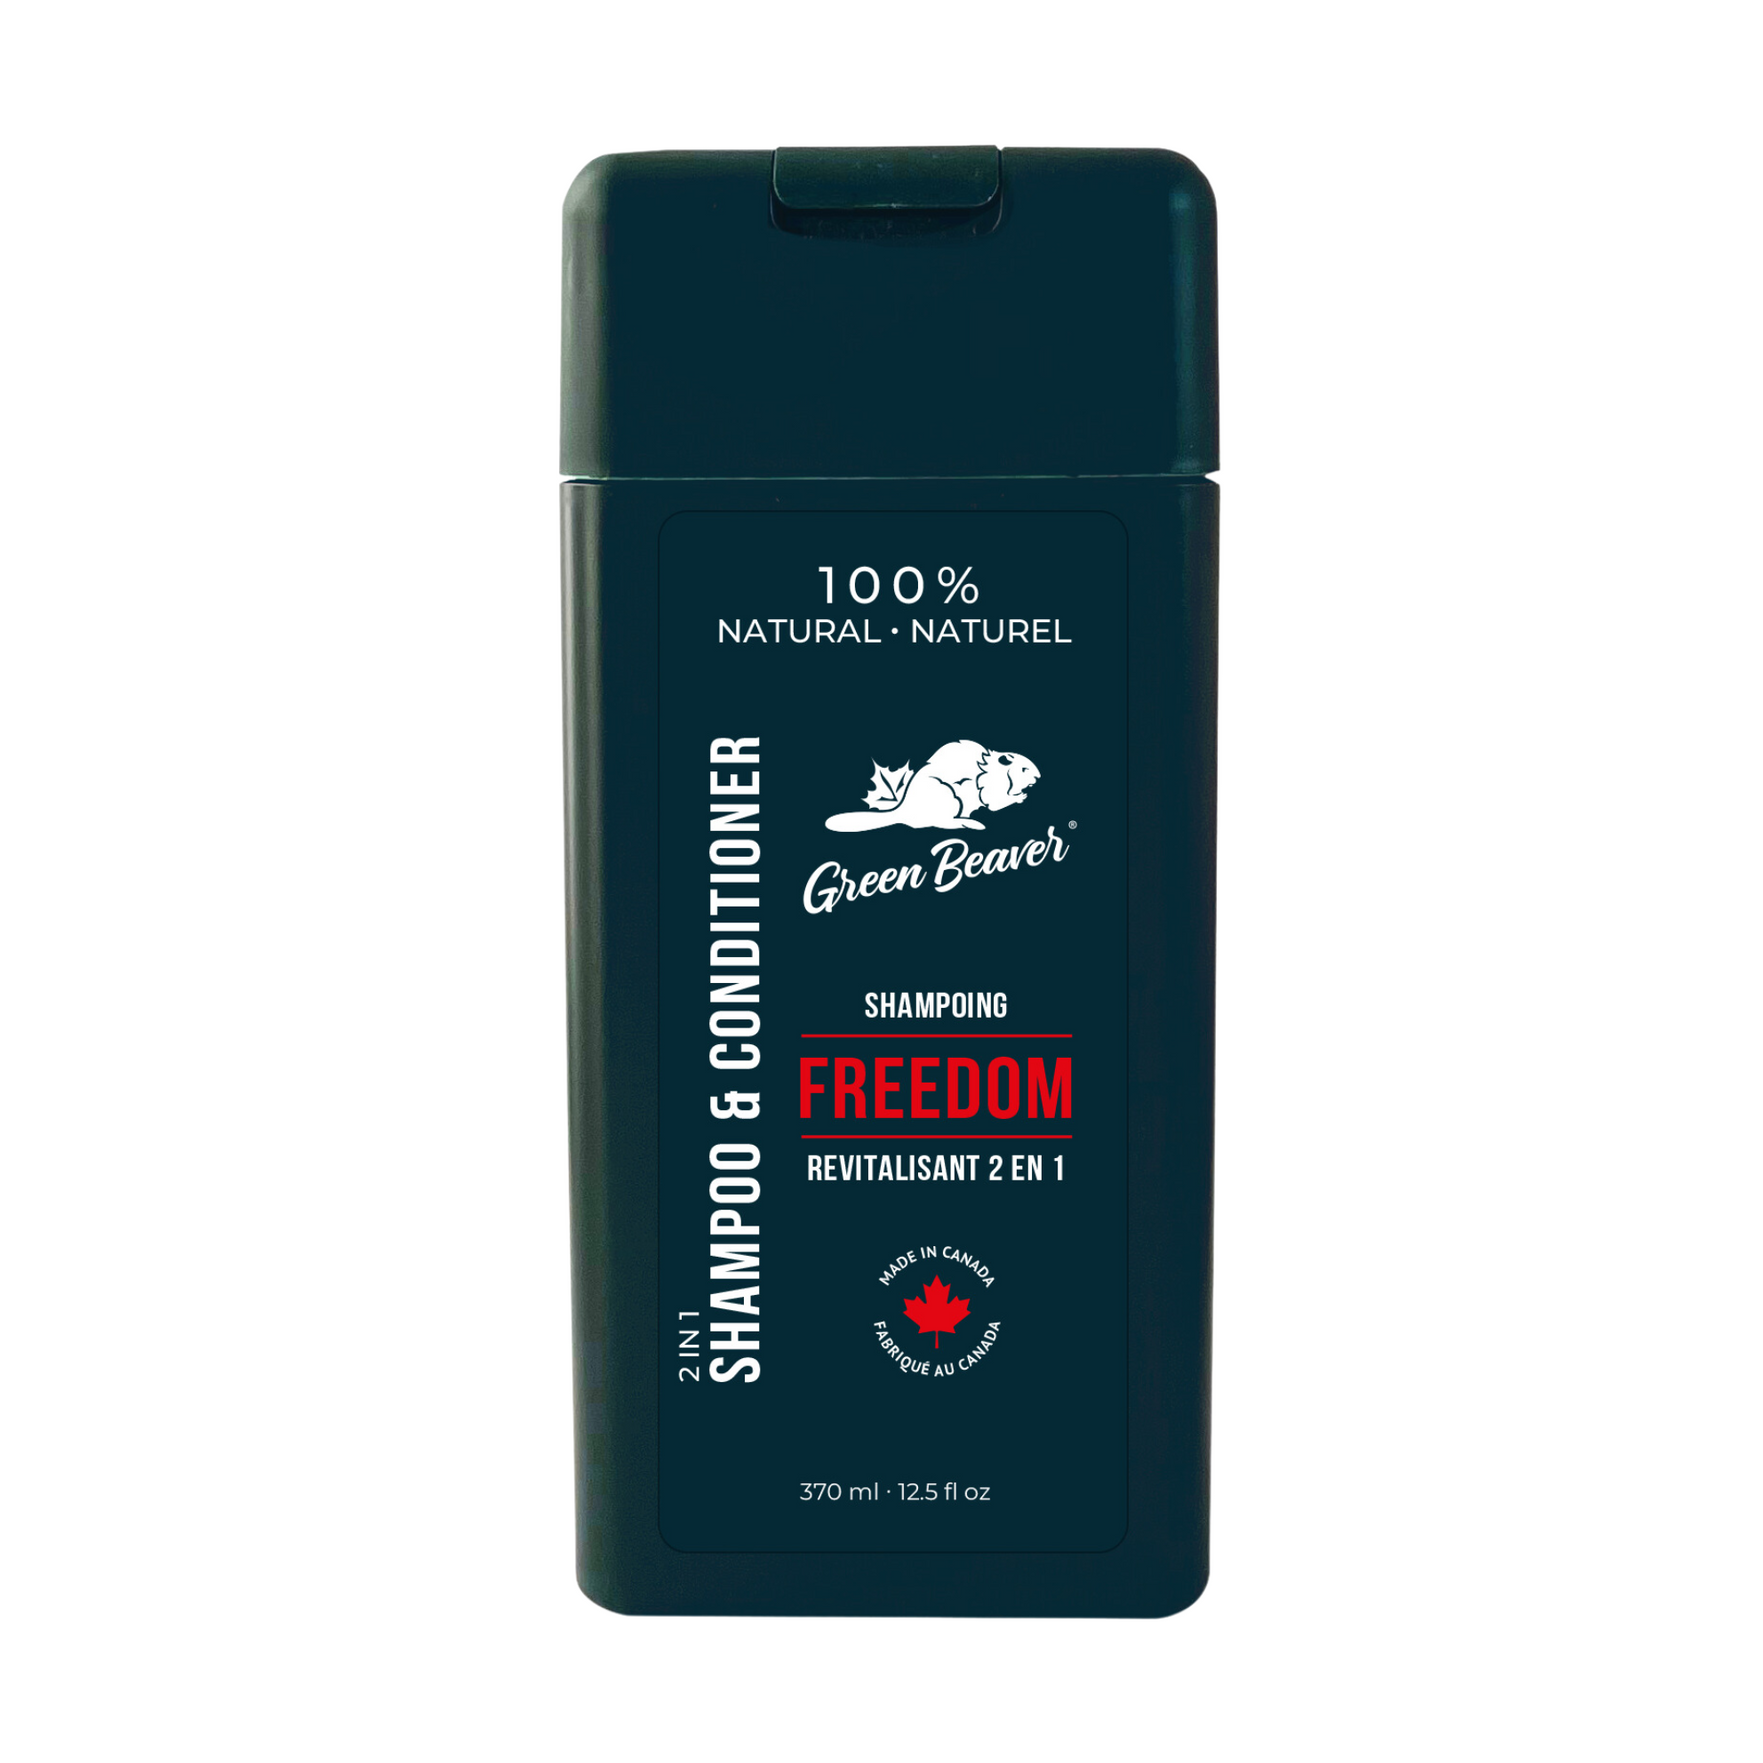 green beaver company - freedom shampoo & conditioner - all things being eco chilliwack - cruelty free - all natural - biodegradable ingredients 